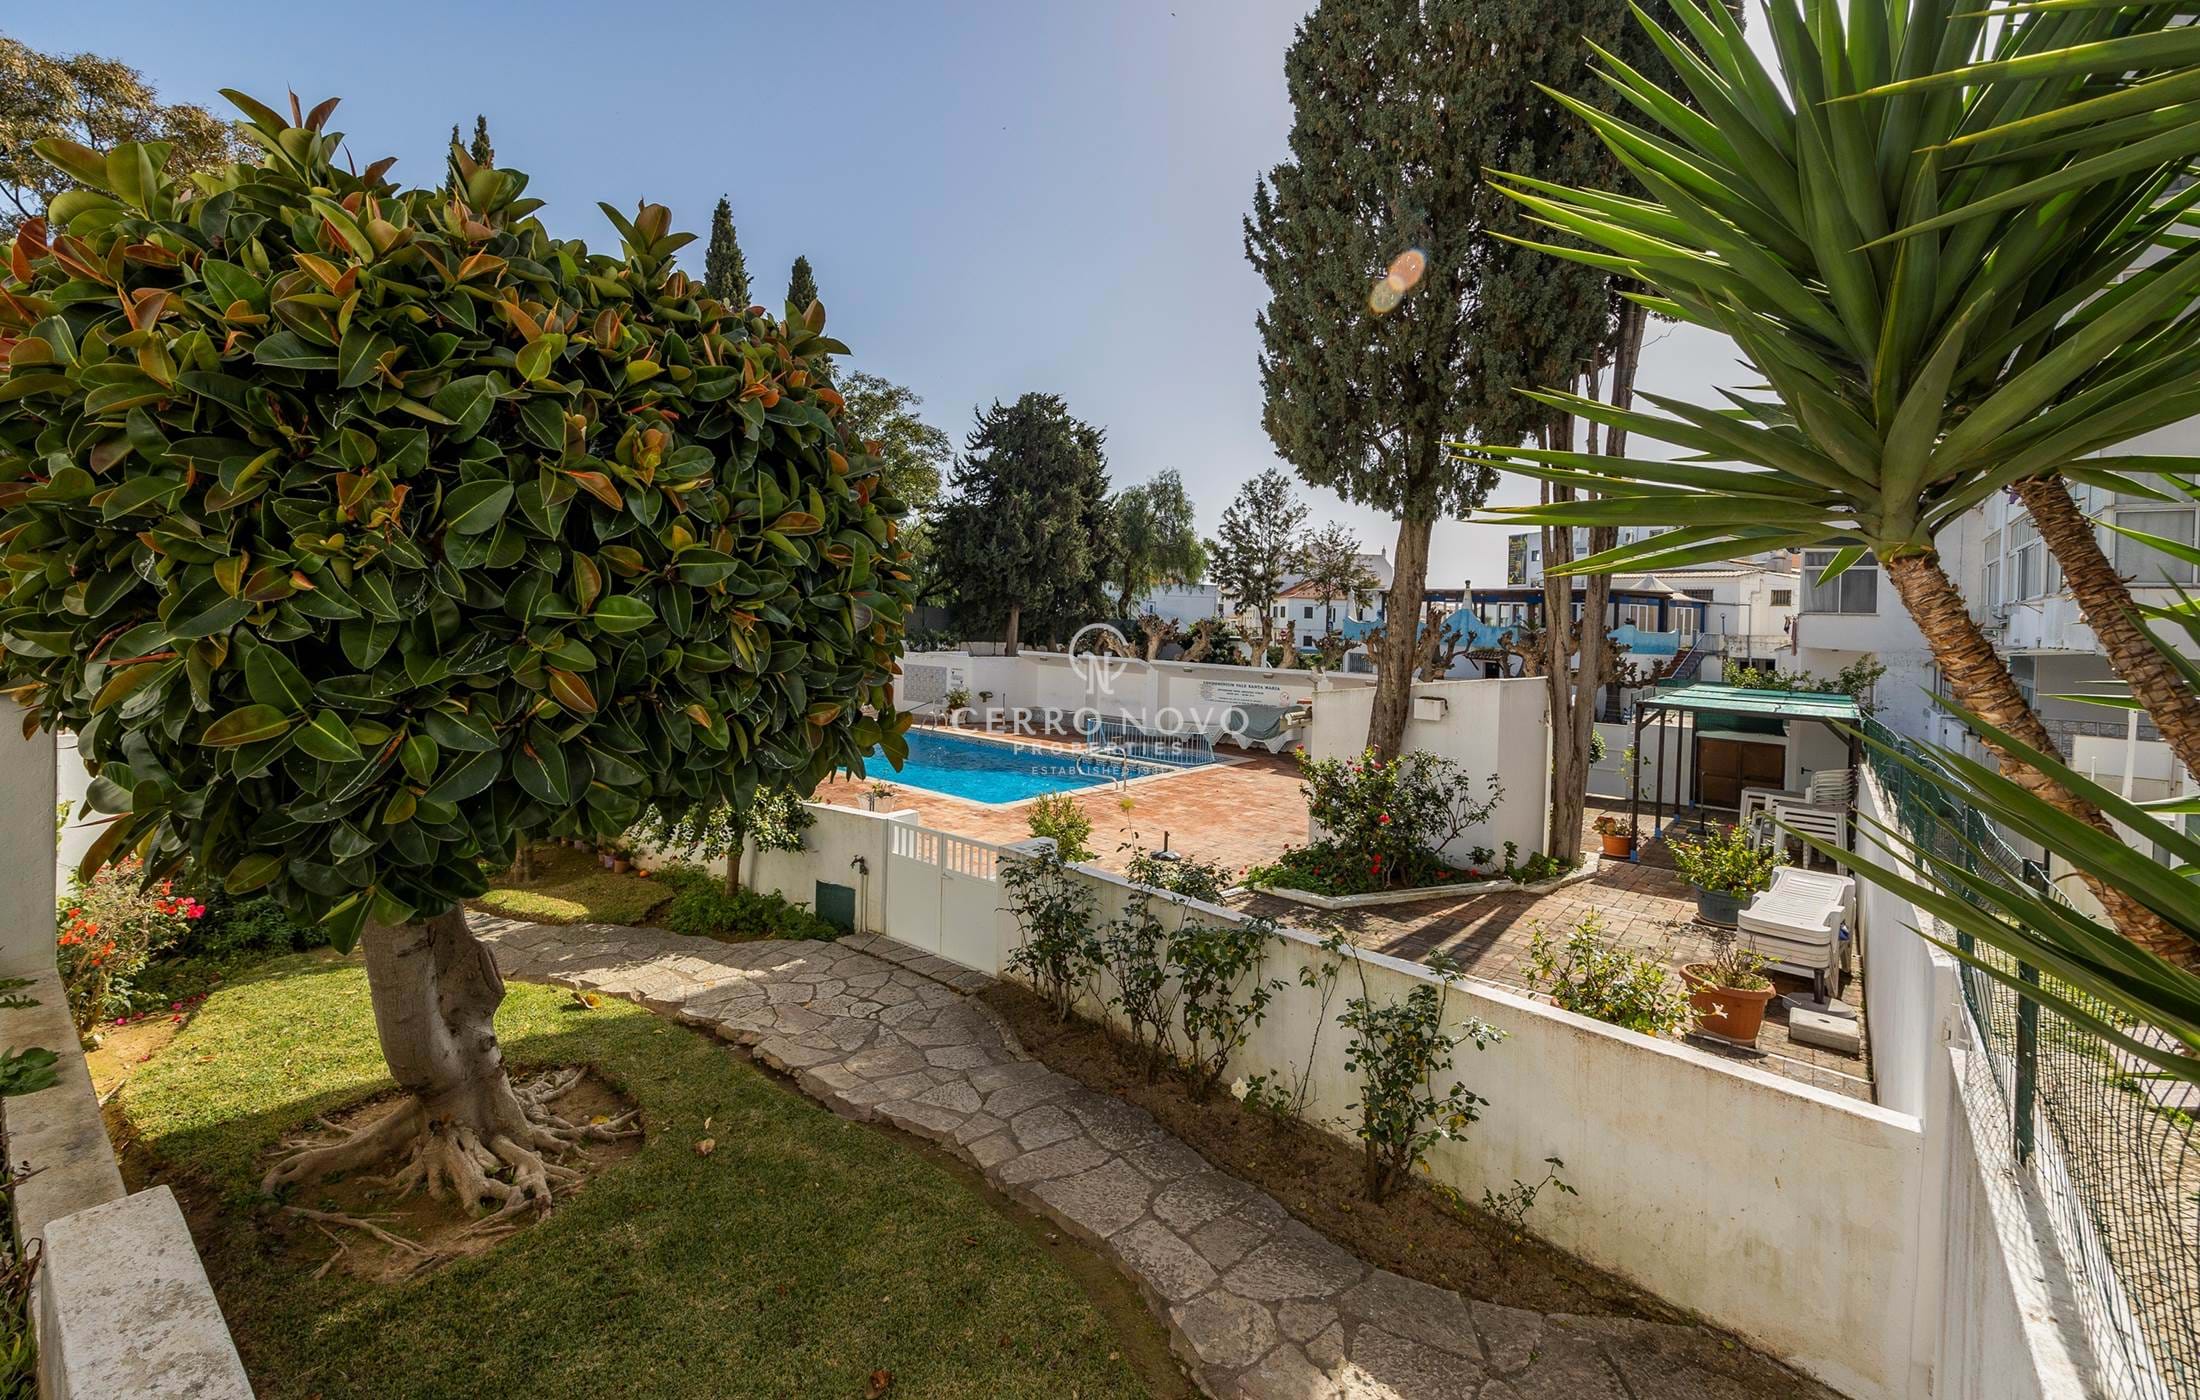 SOLD- A traditional, convenient one bedroom apartment with communal pool